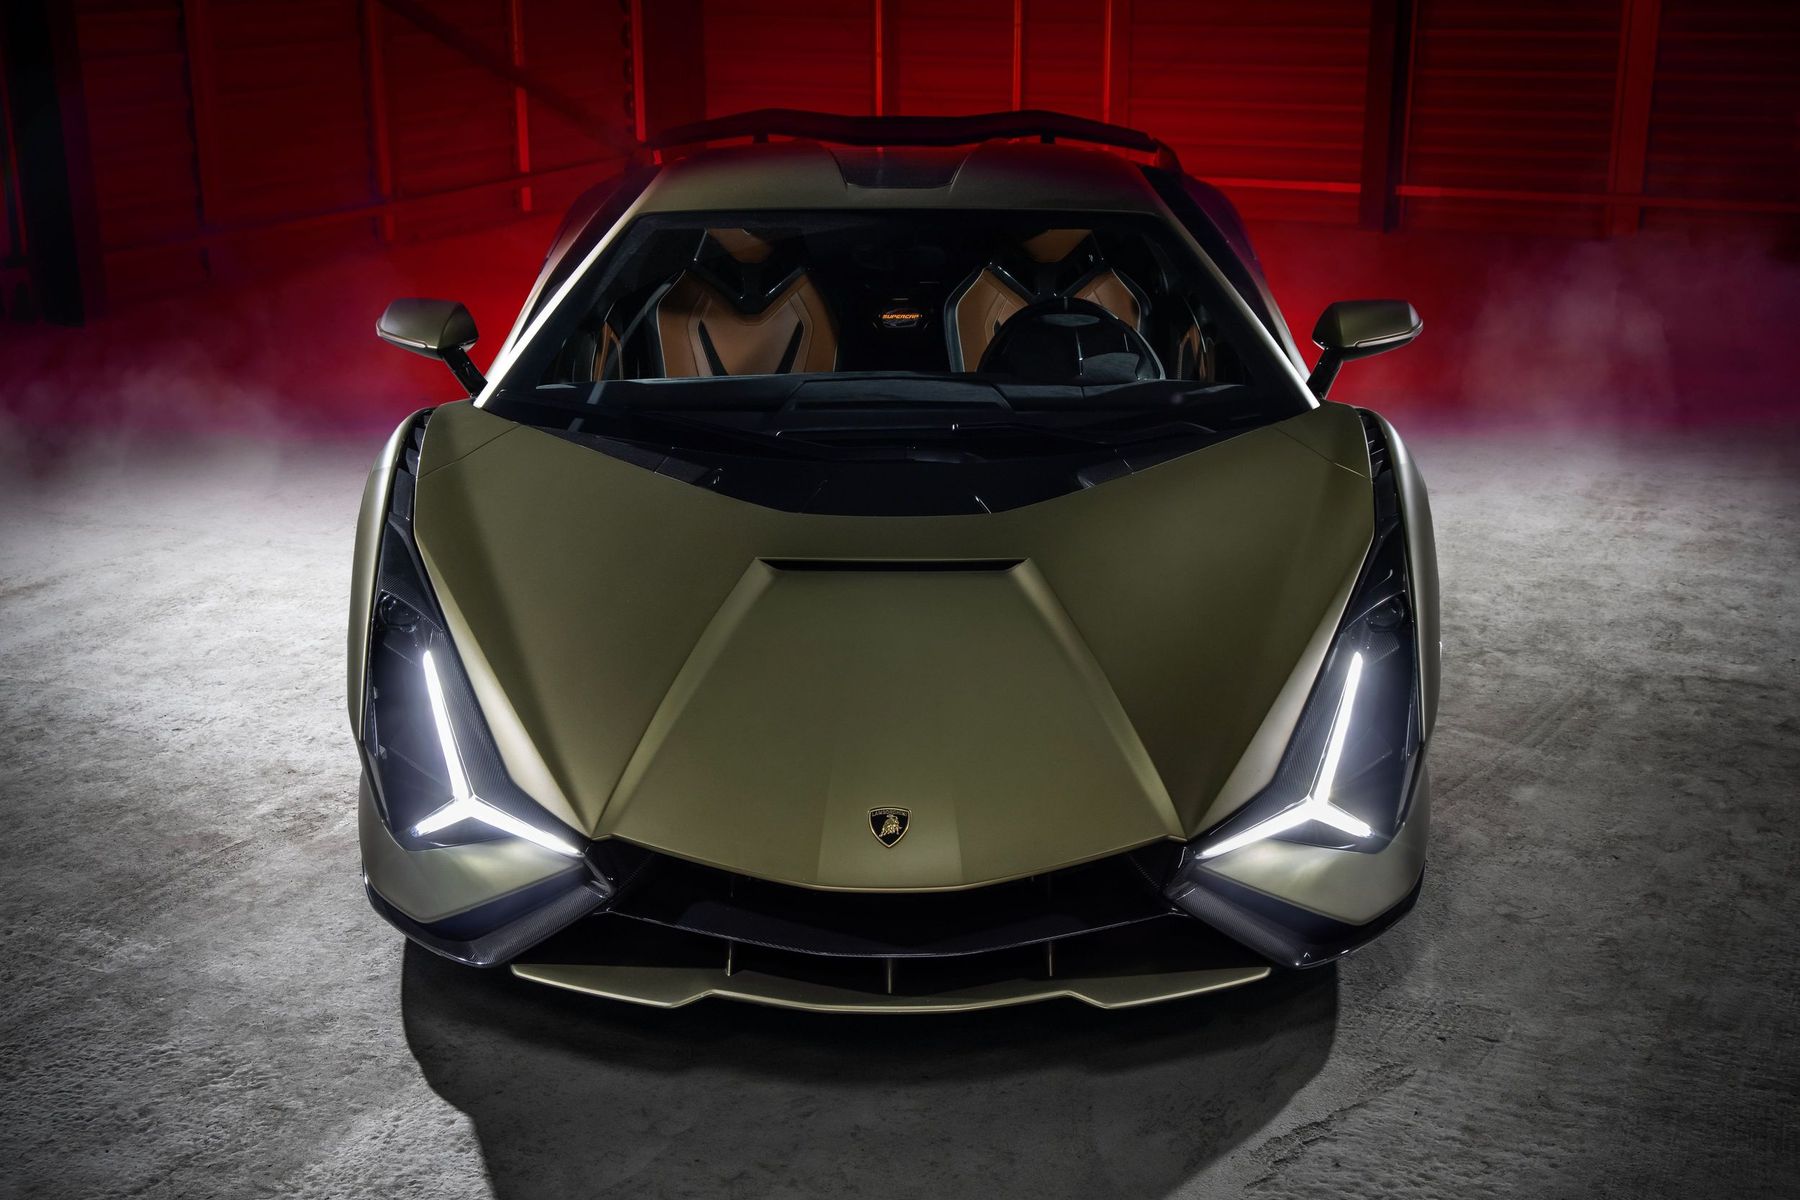 Fastest-ever Lamborghini gets power boost from MIT developed supercapacitor